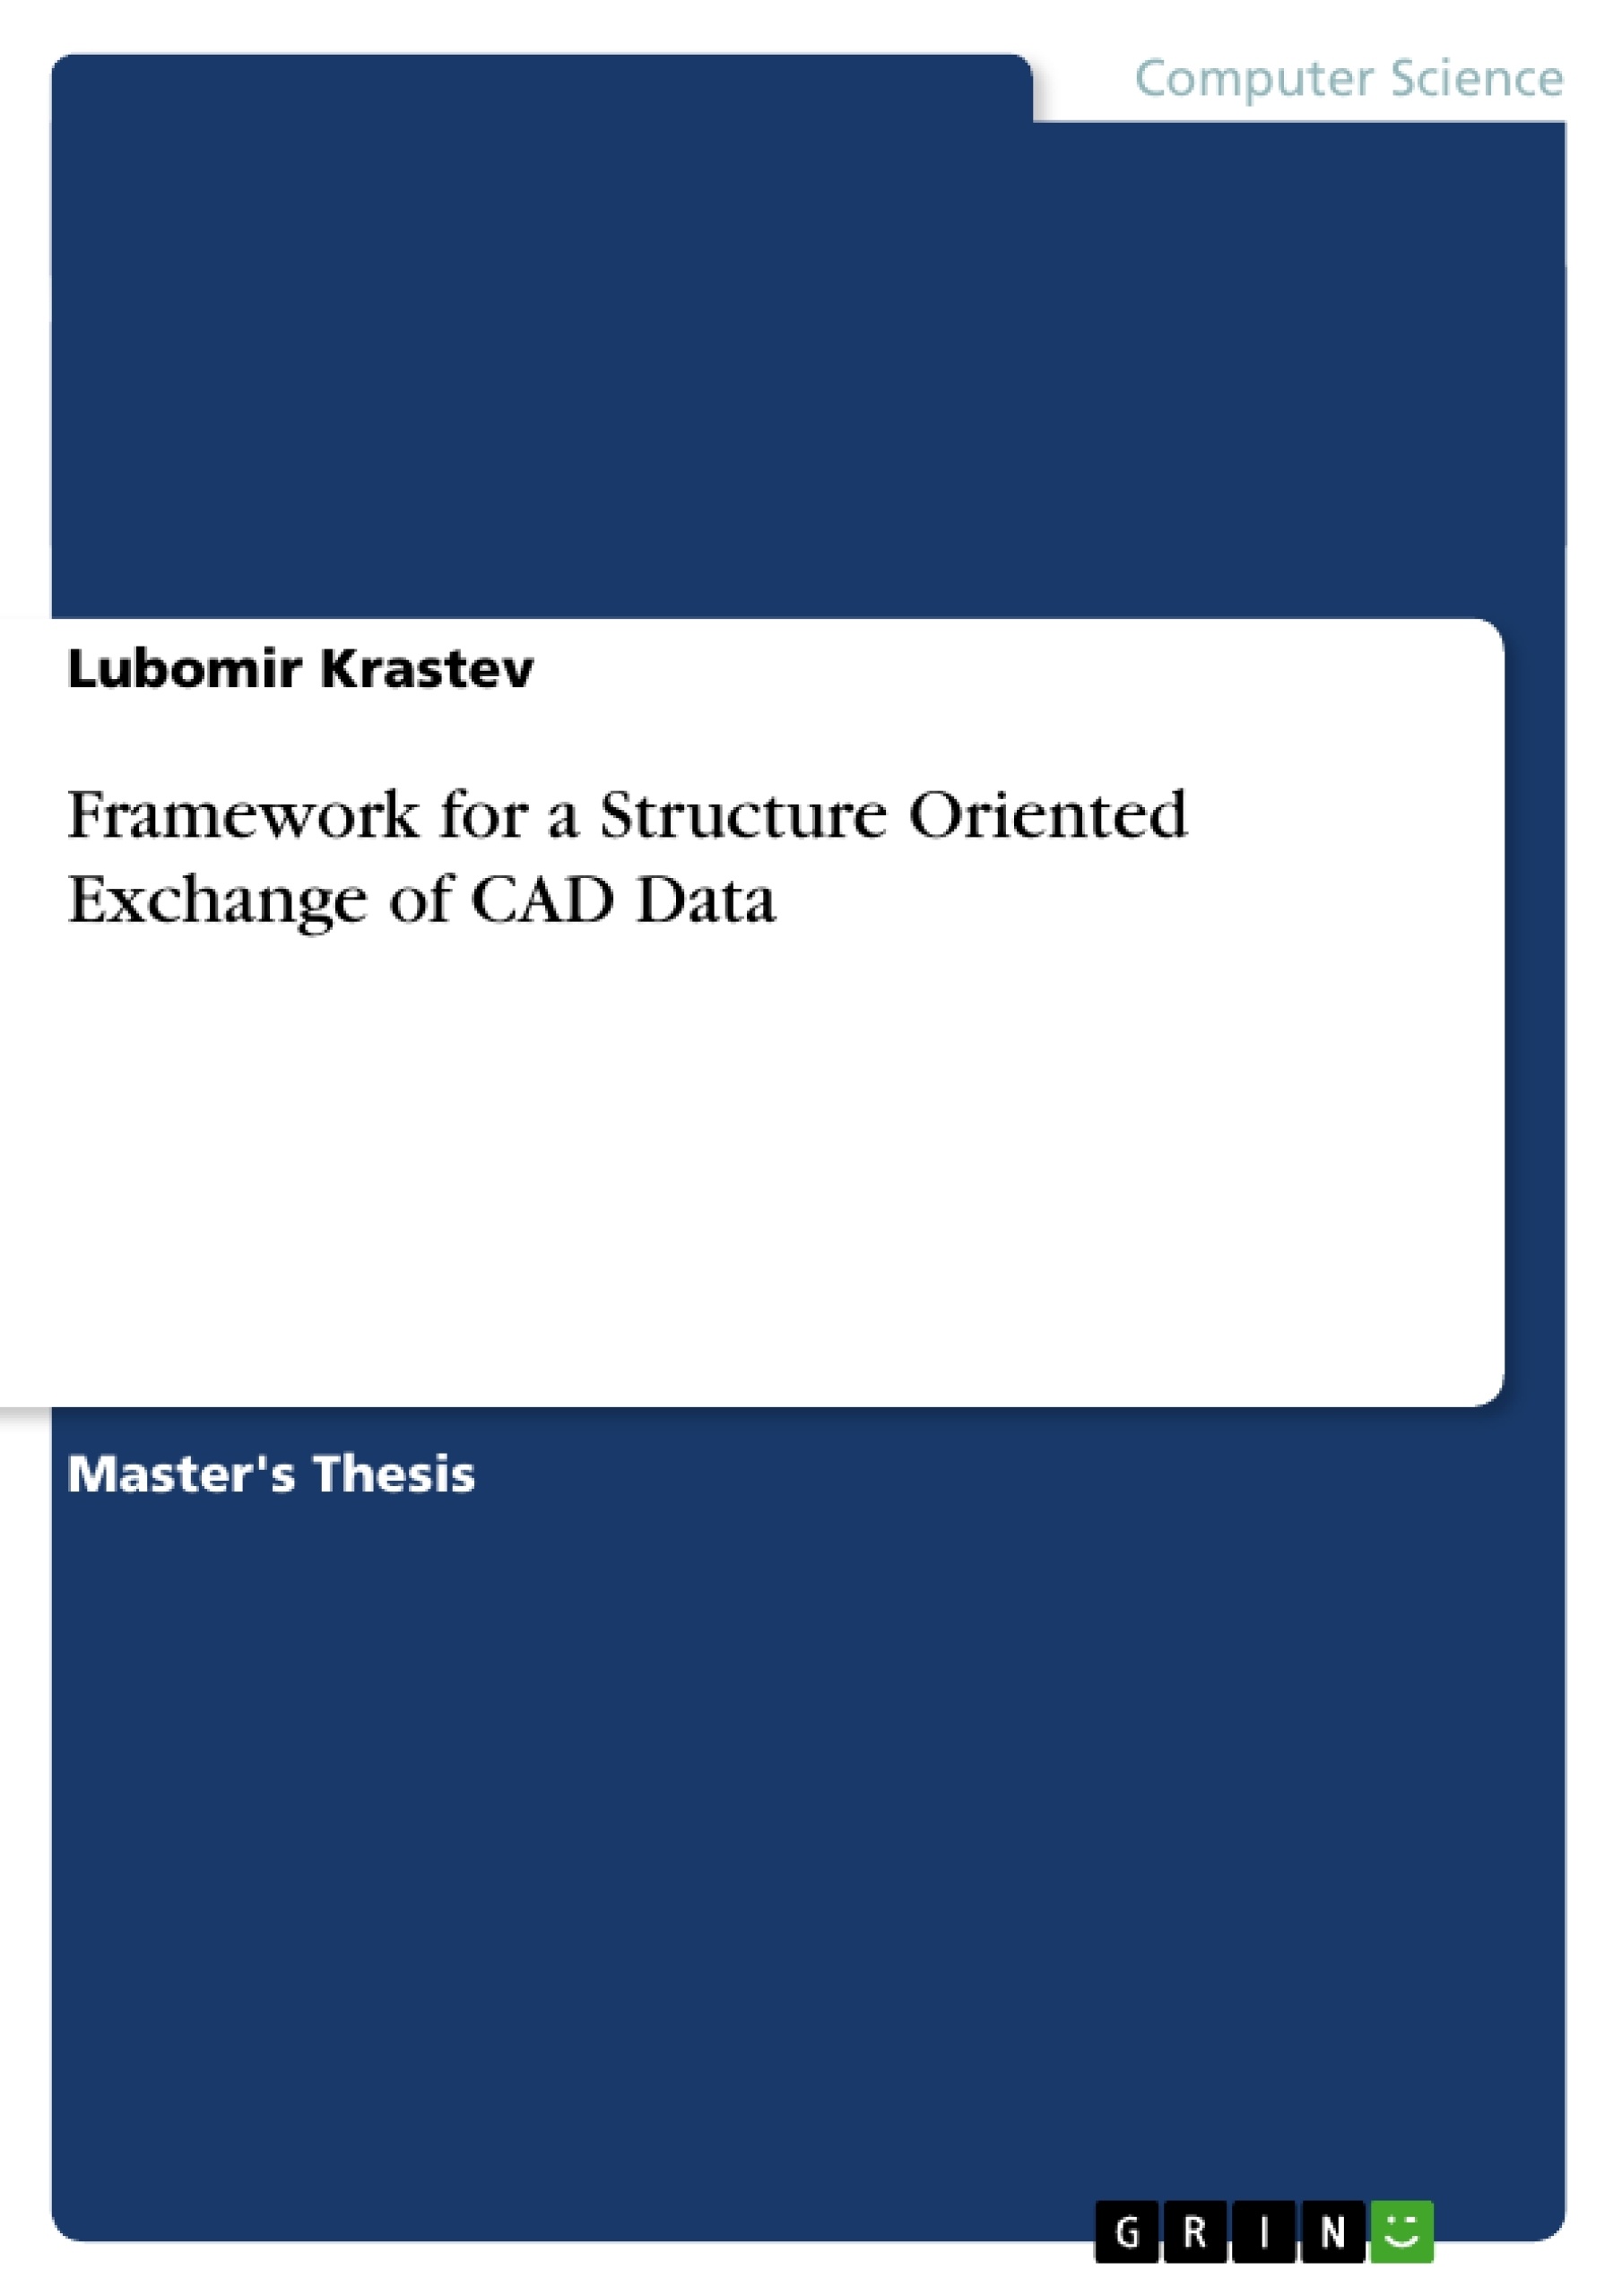 Title: Framework for a Structure Oriented Exchange of CAD Data